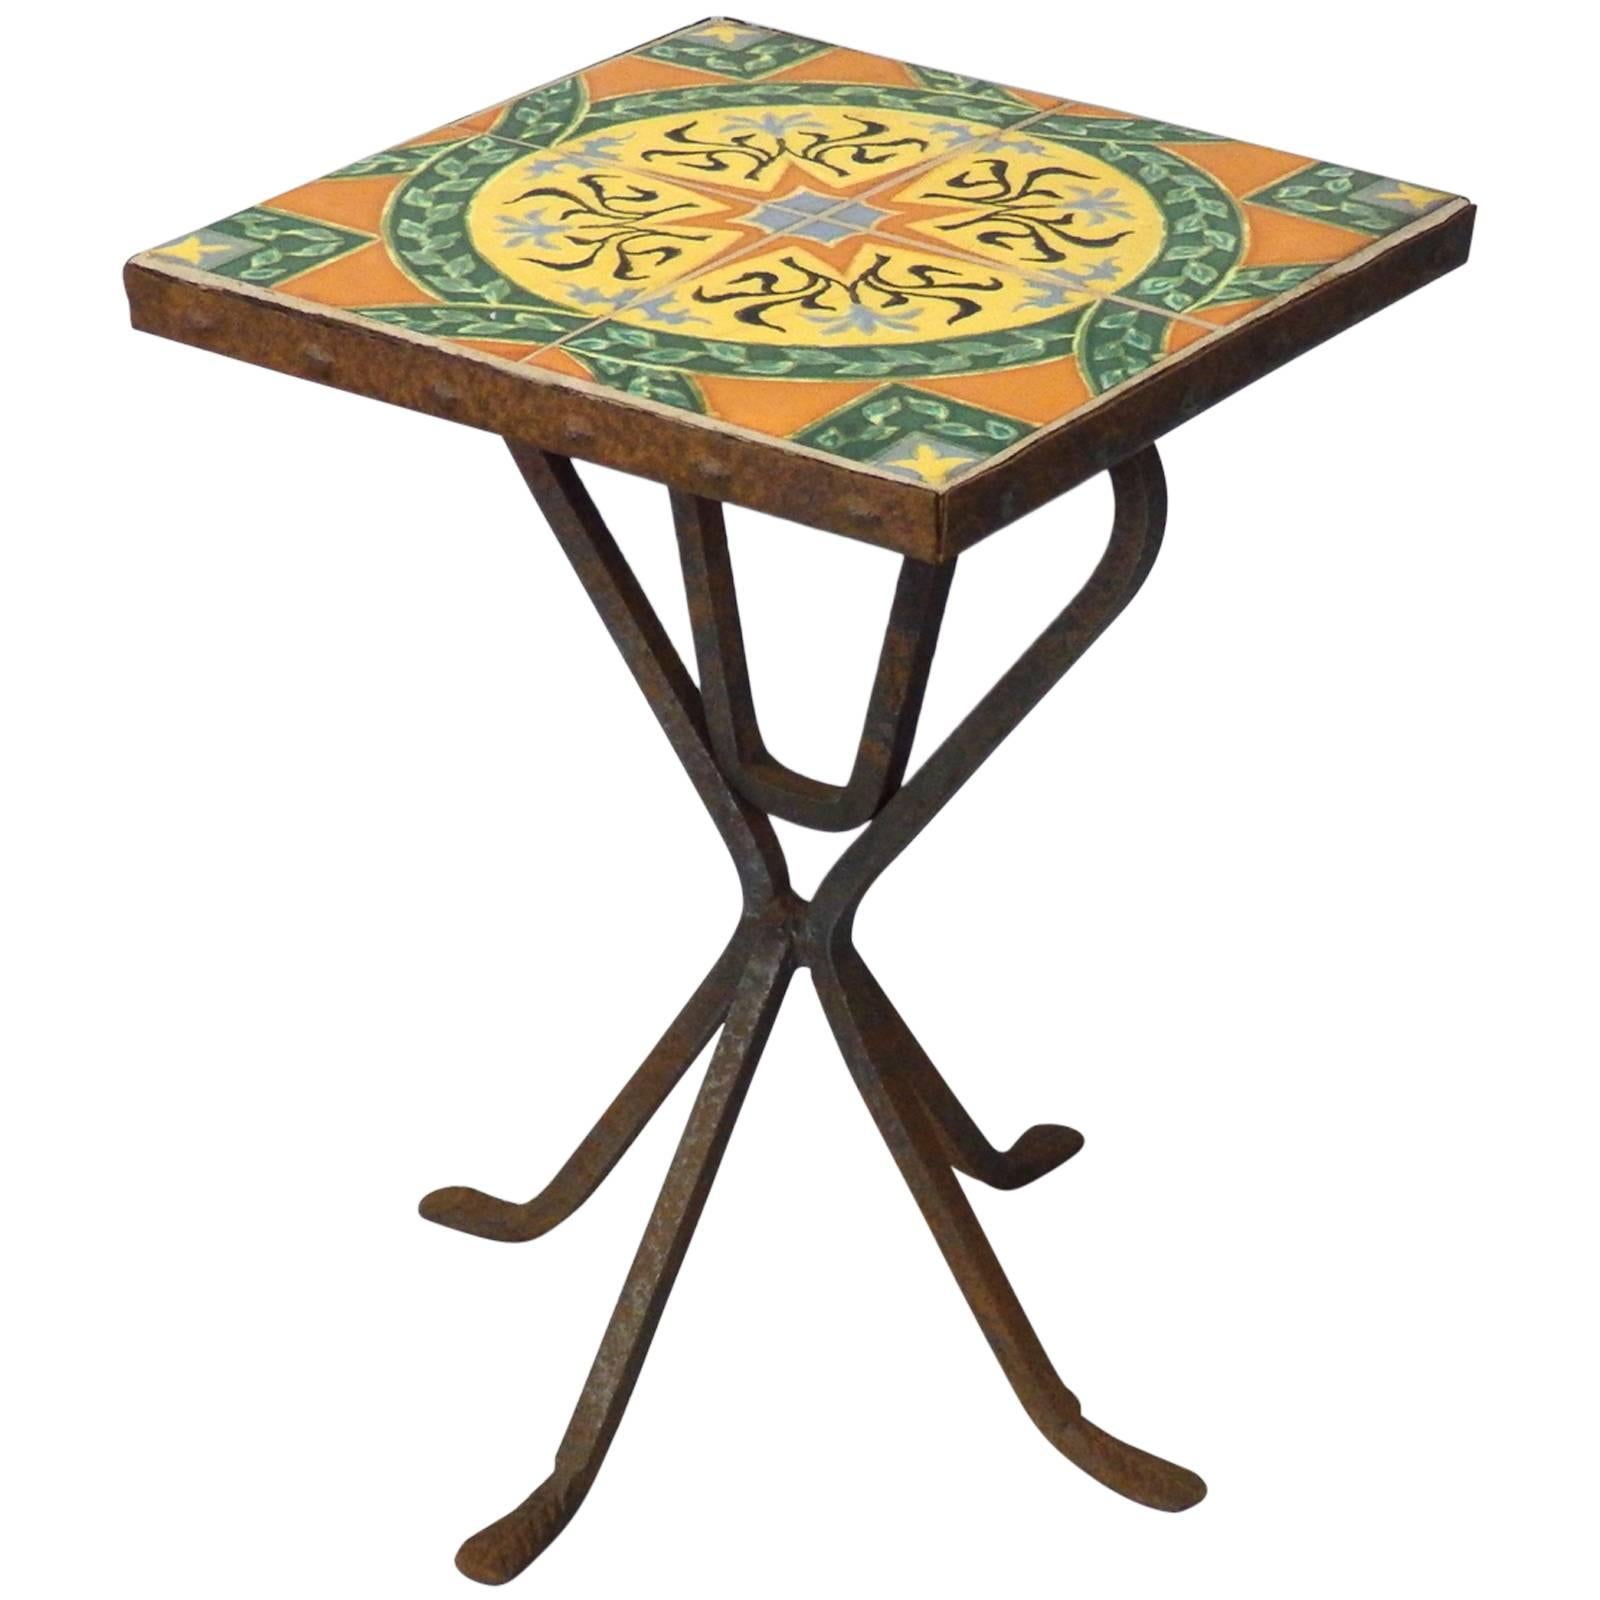 Wrought Iron Base Catalina Tile-Top Occasional Table